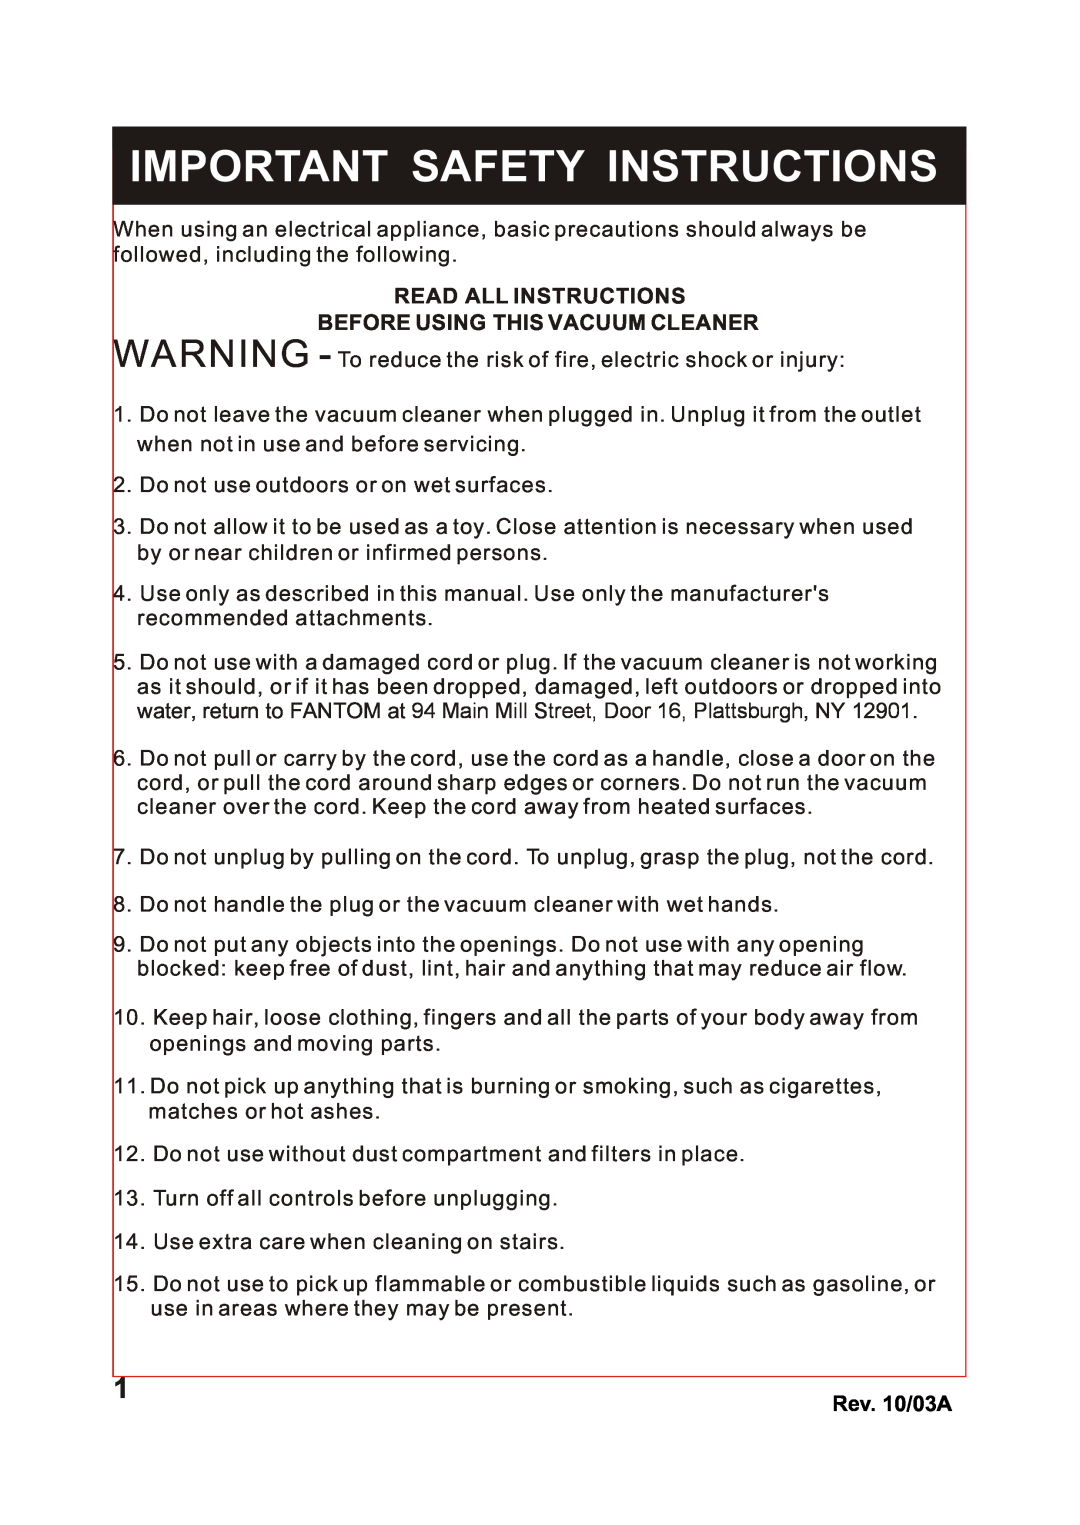 Fantom Vacuum FM740 B Important Safety Instructions, Do not use outdoors or on wet surfaces, Read All Instructions 